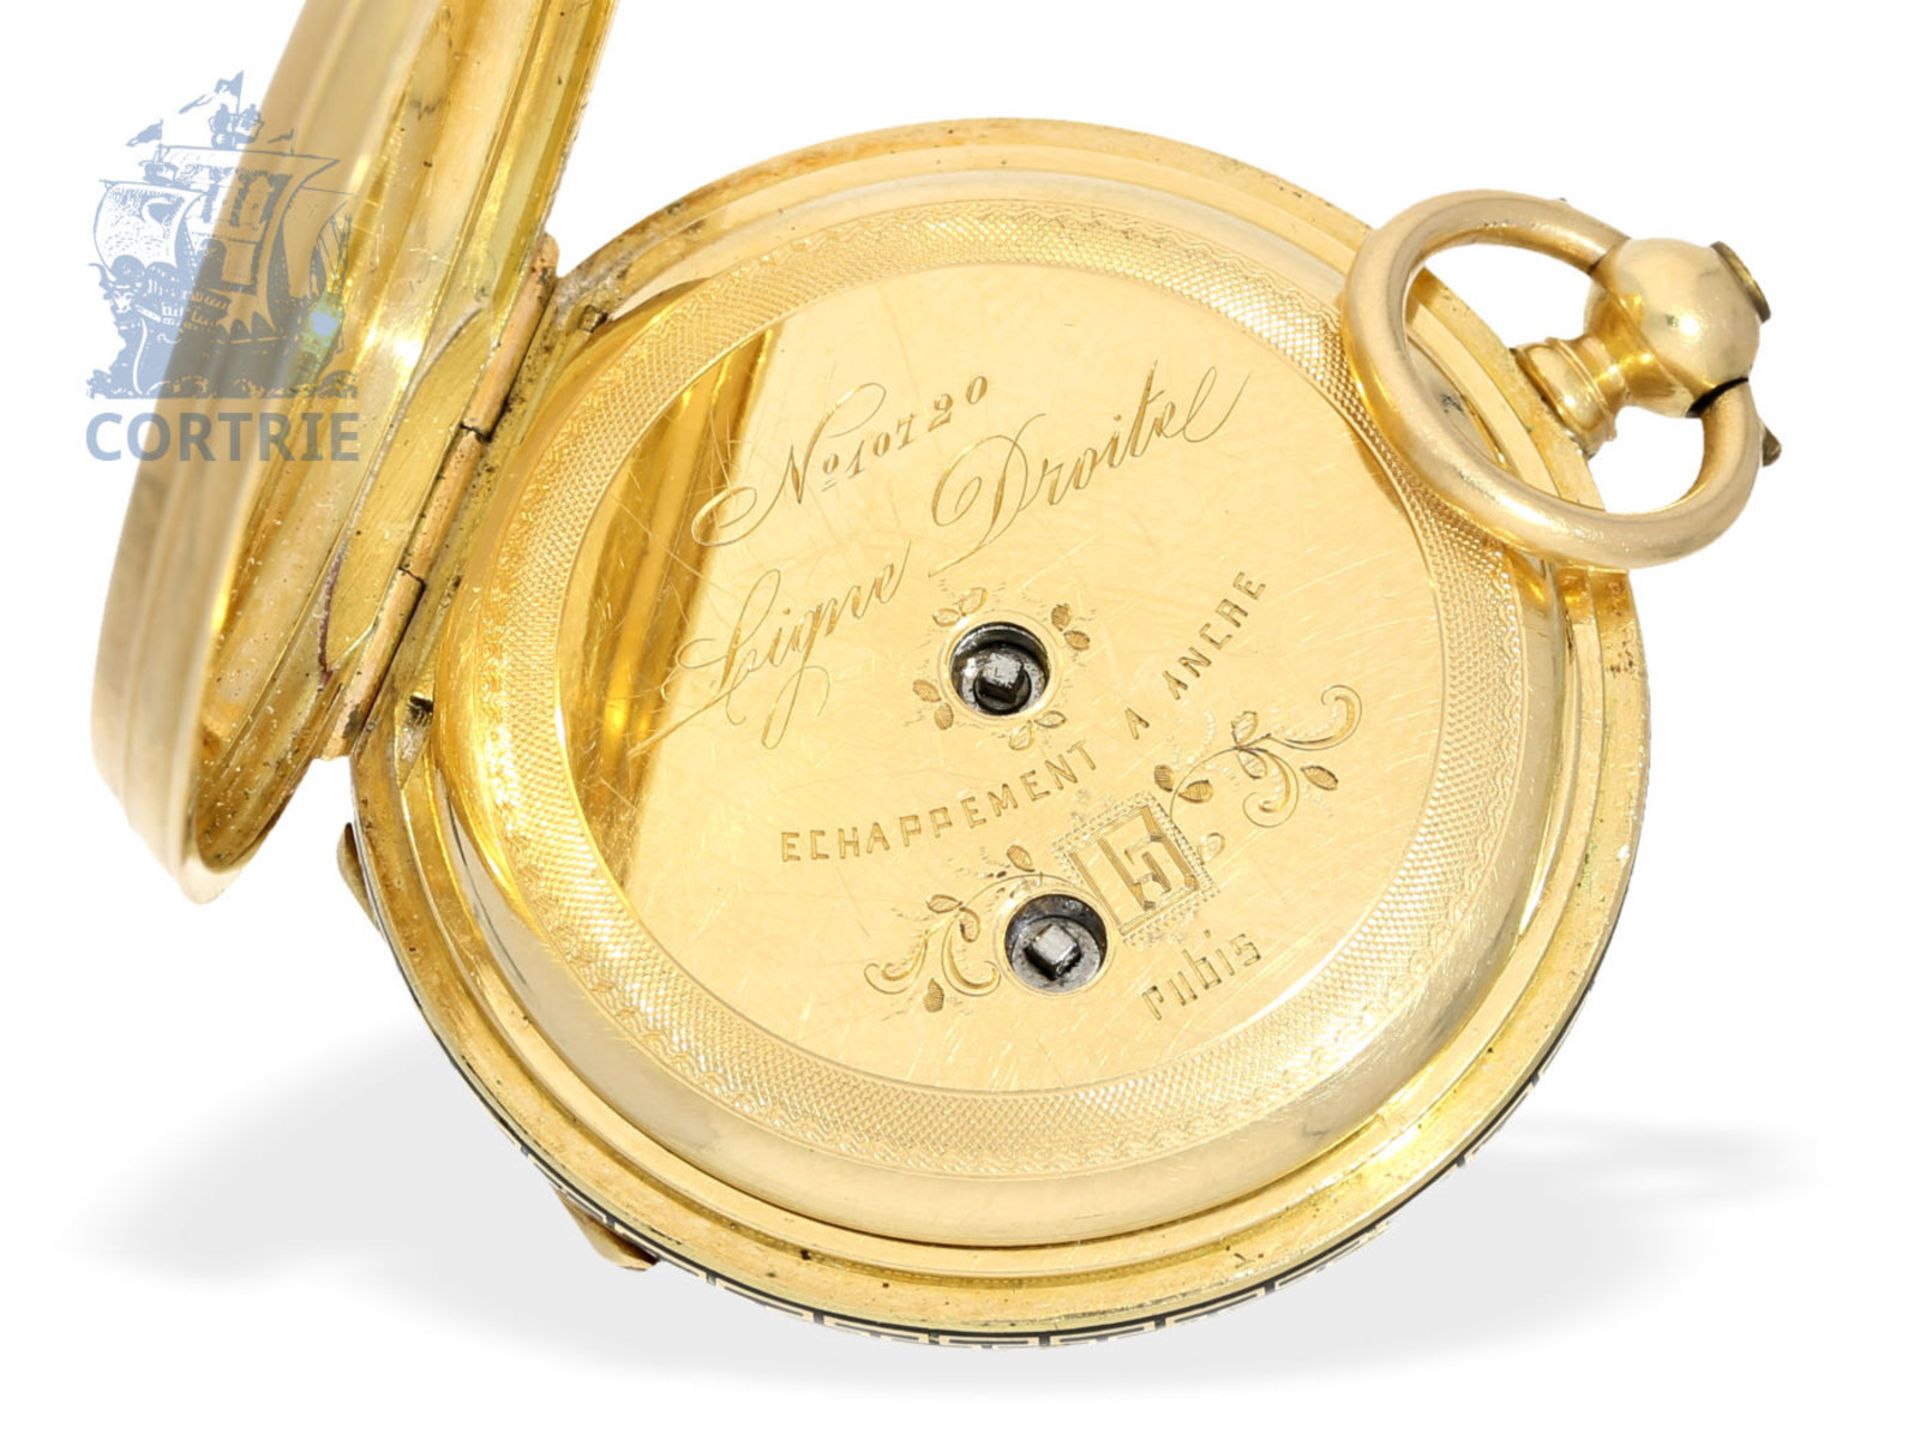 Pocket watch: fine gold/enamel hunting case watch for the Central American market ca. 1865, - Image 4 of 4